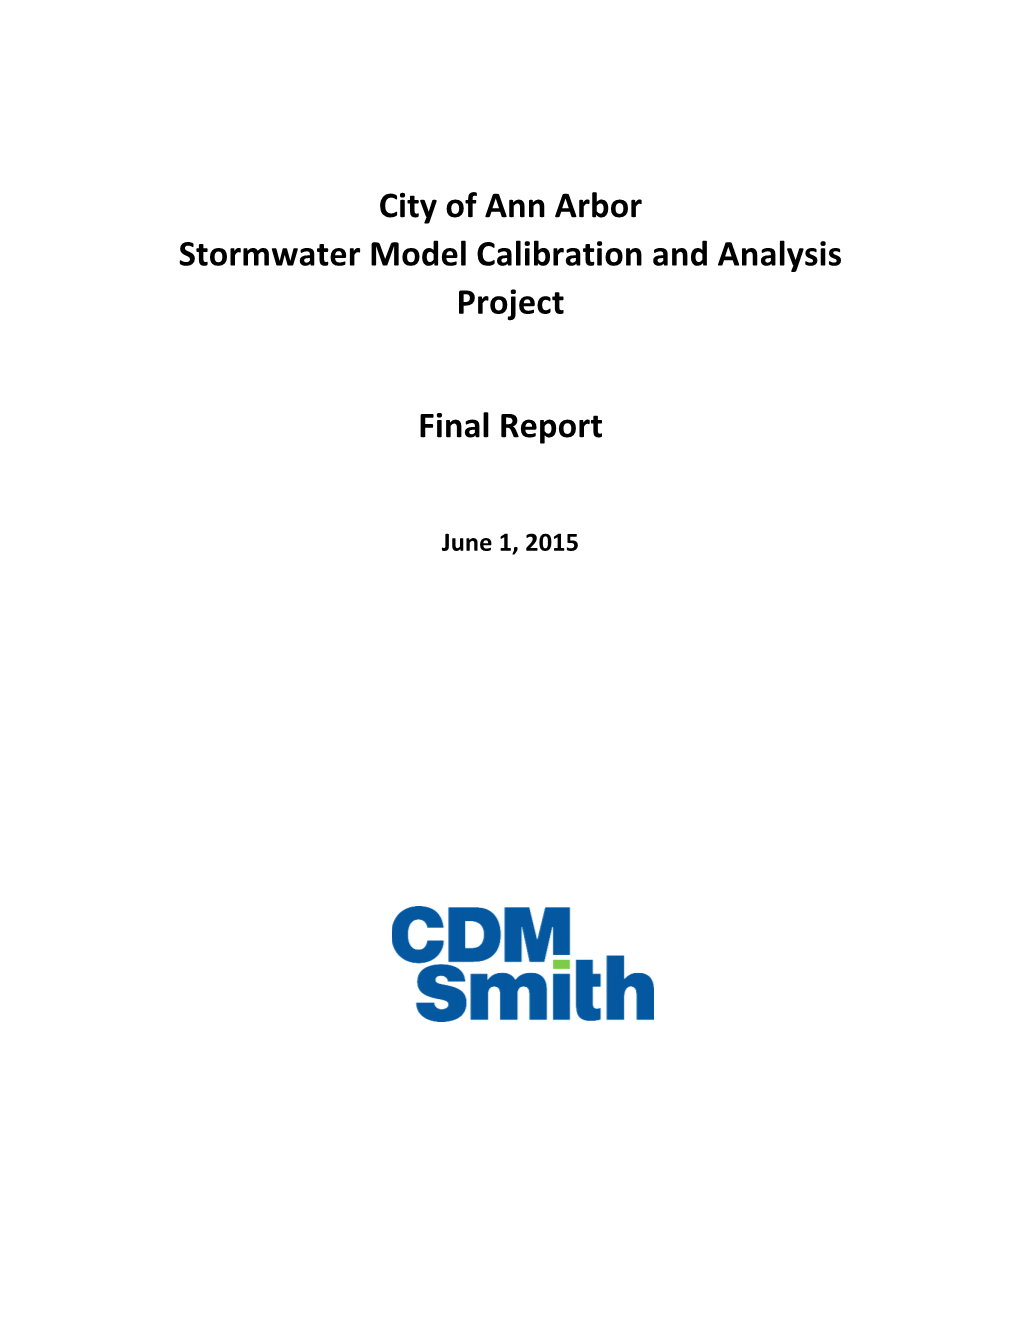 City of Ann Arbor Stormwater Model Calibration and Analysis Project